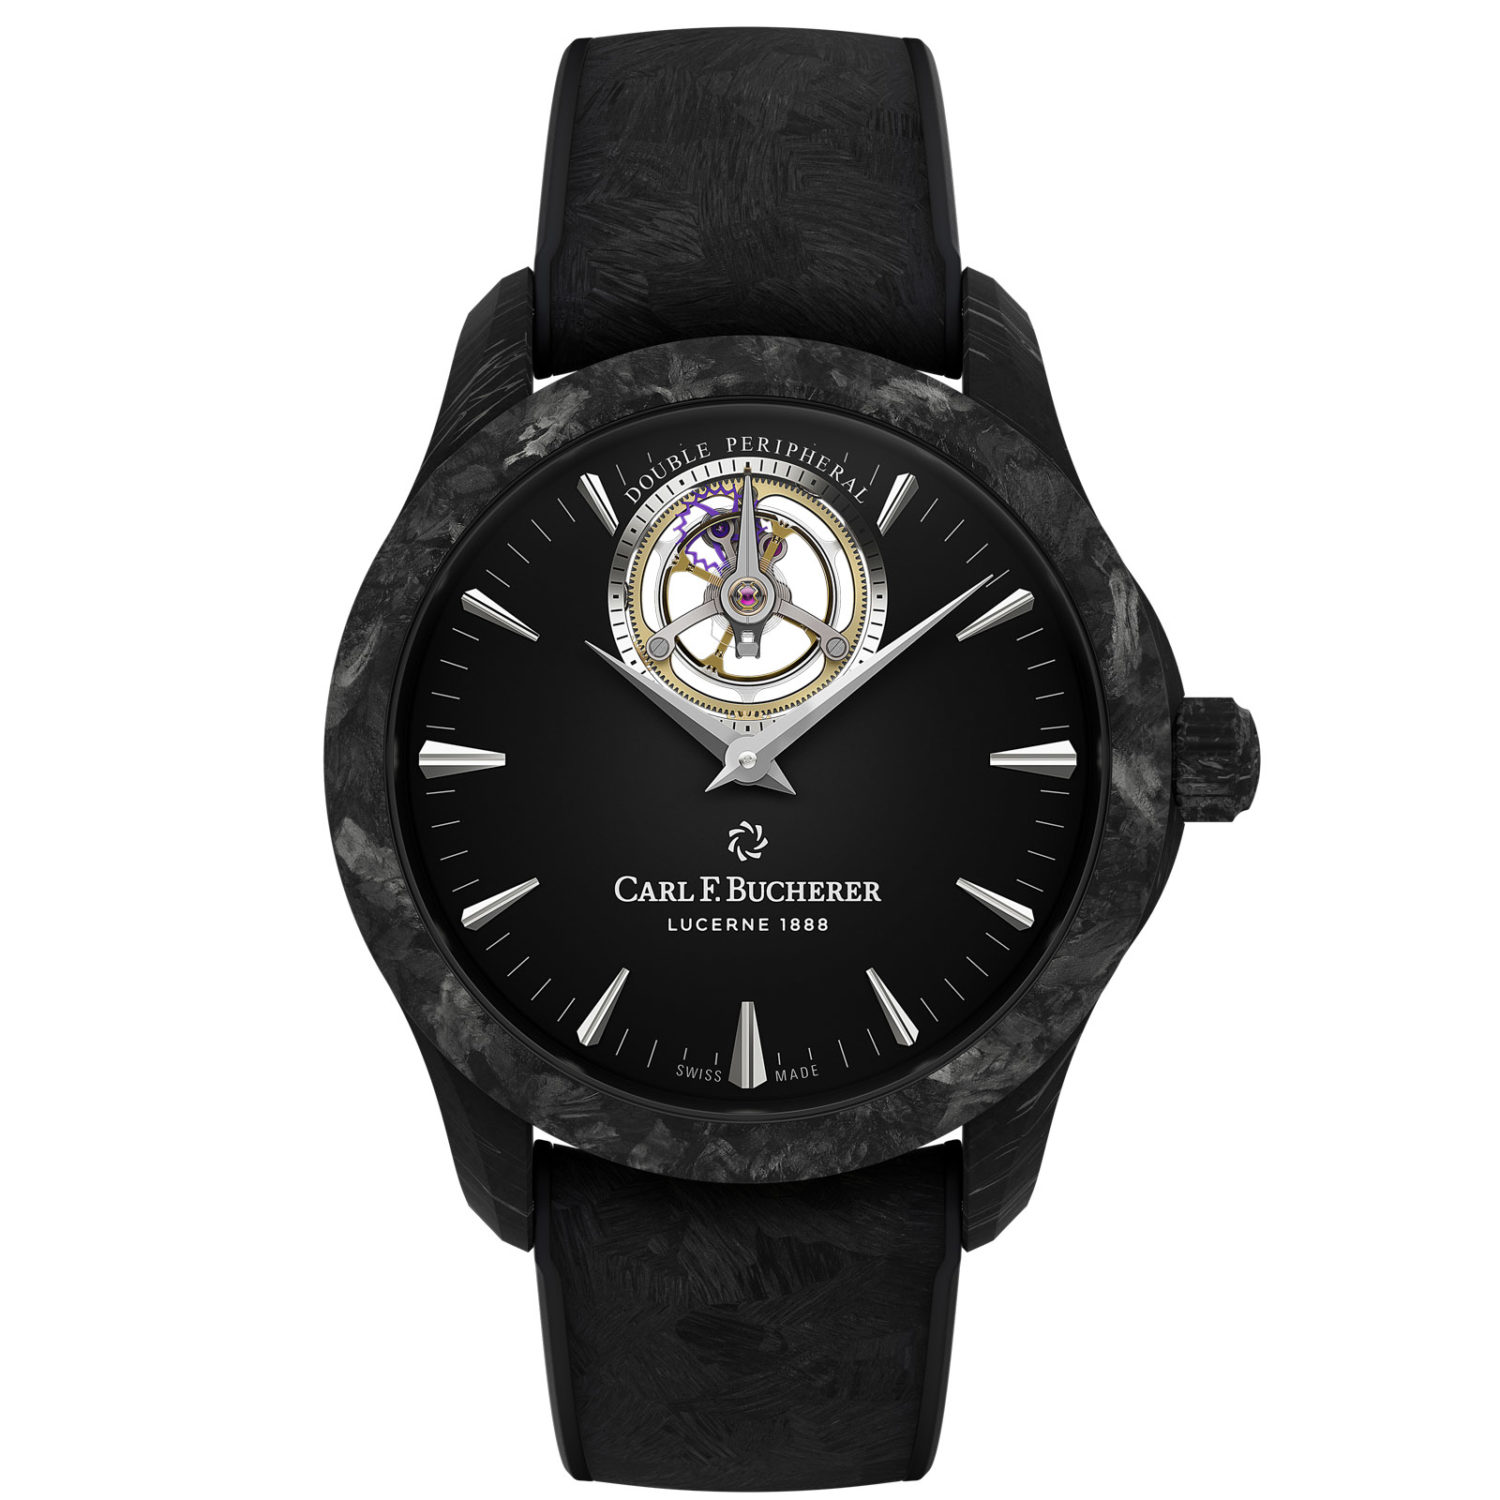 Celebrating 135 Years, Carl F. Bucherer Launches Five Watch Capsule Collection Done in Black